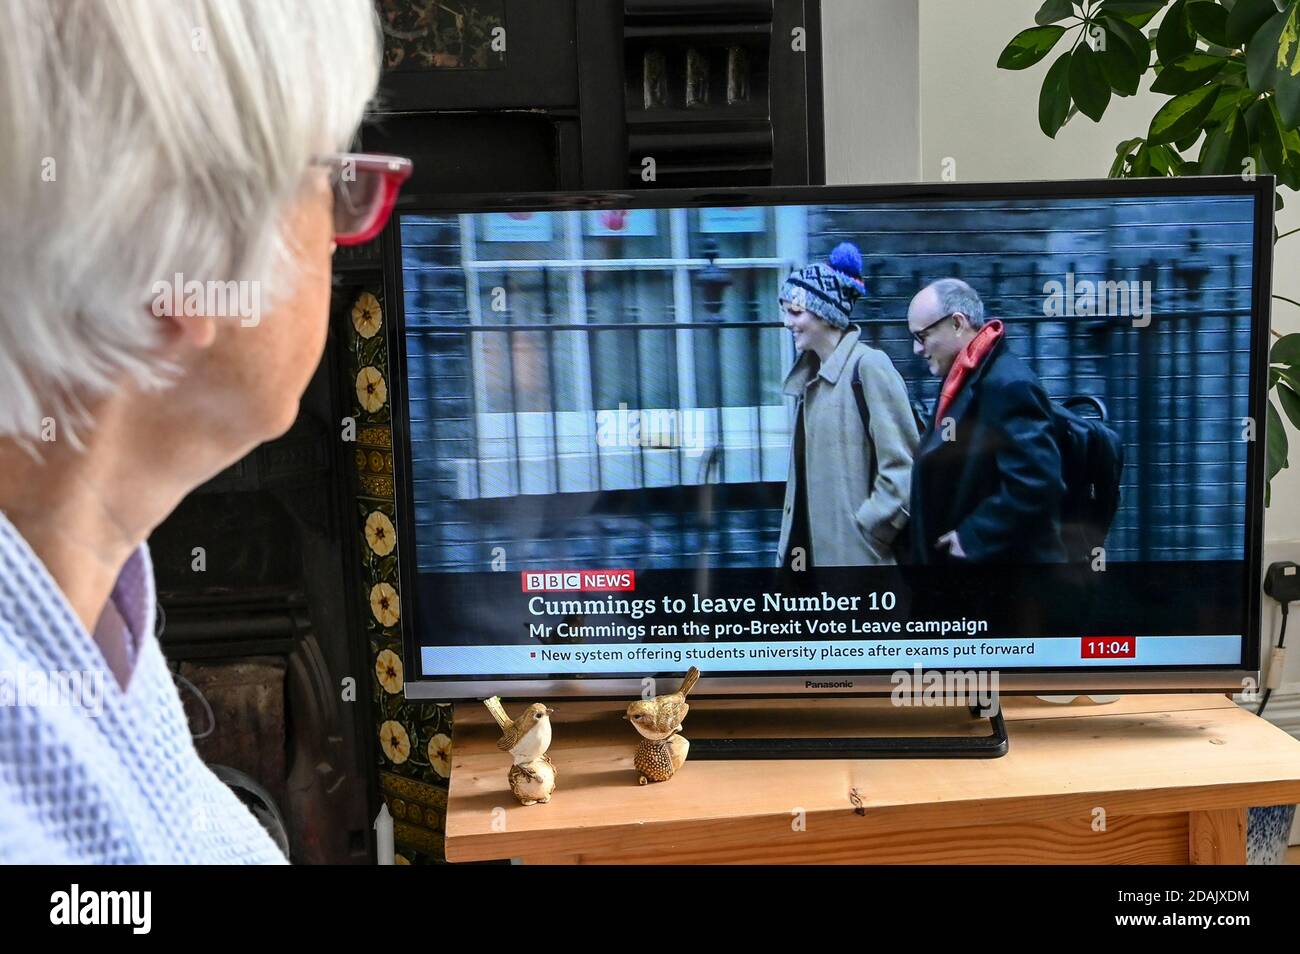 Televised news report of Dominic Cummings resigning as chief advisor to Boris Johnson with caption 'Cummings to leave Number 10', watched by a viewer. Stock Photo